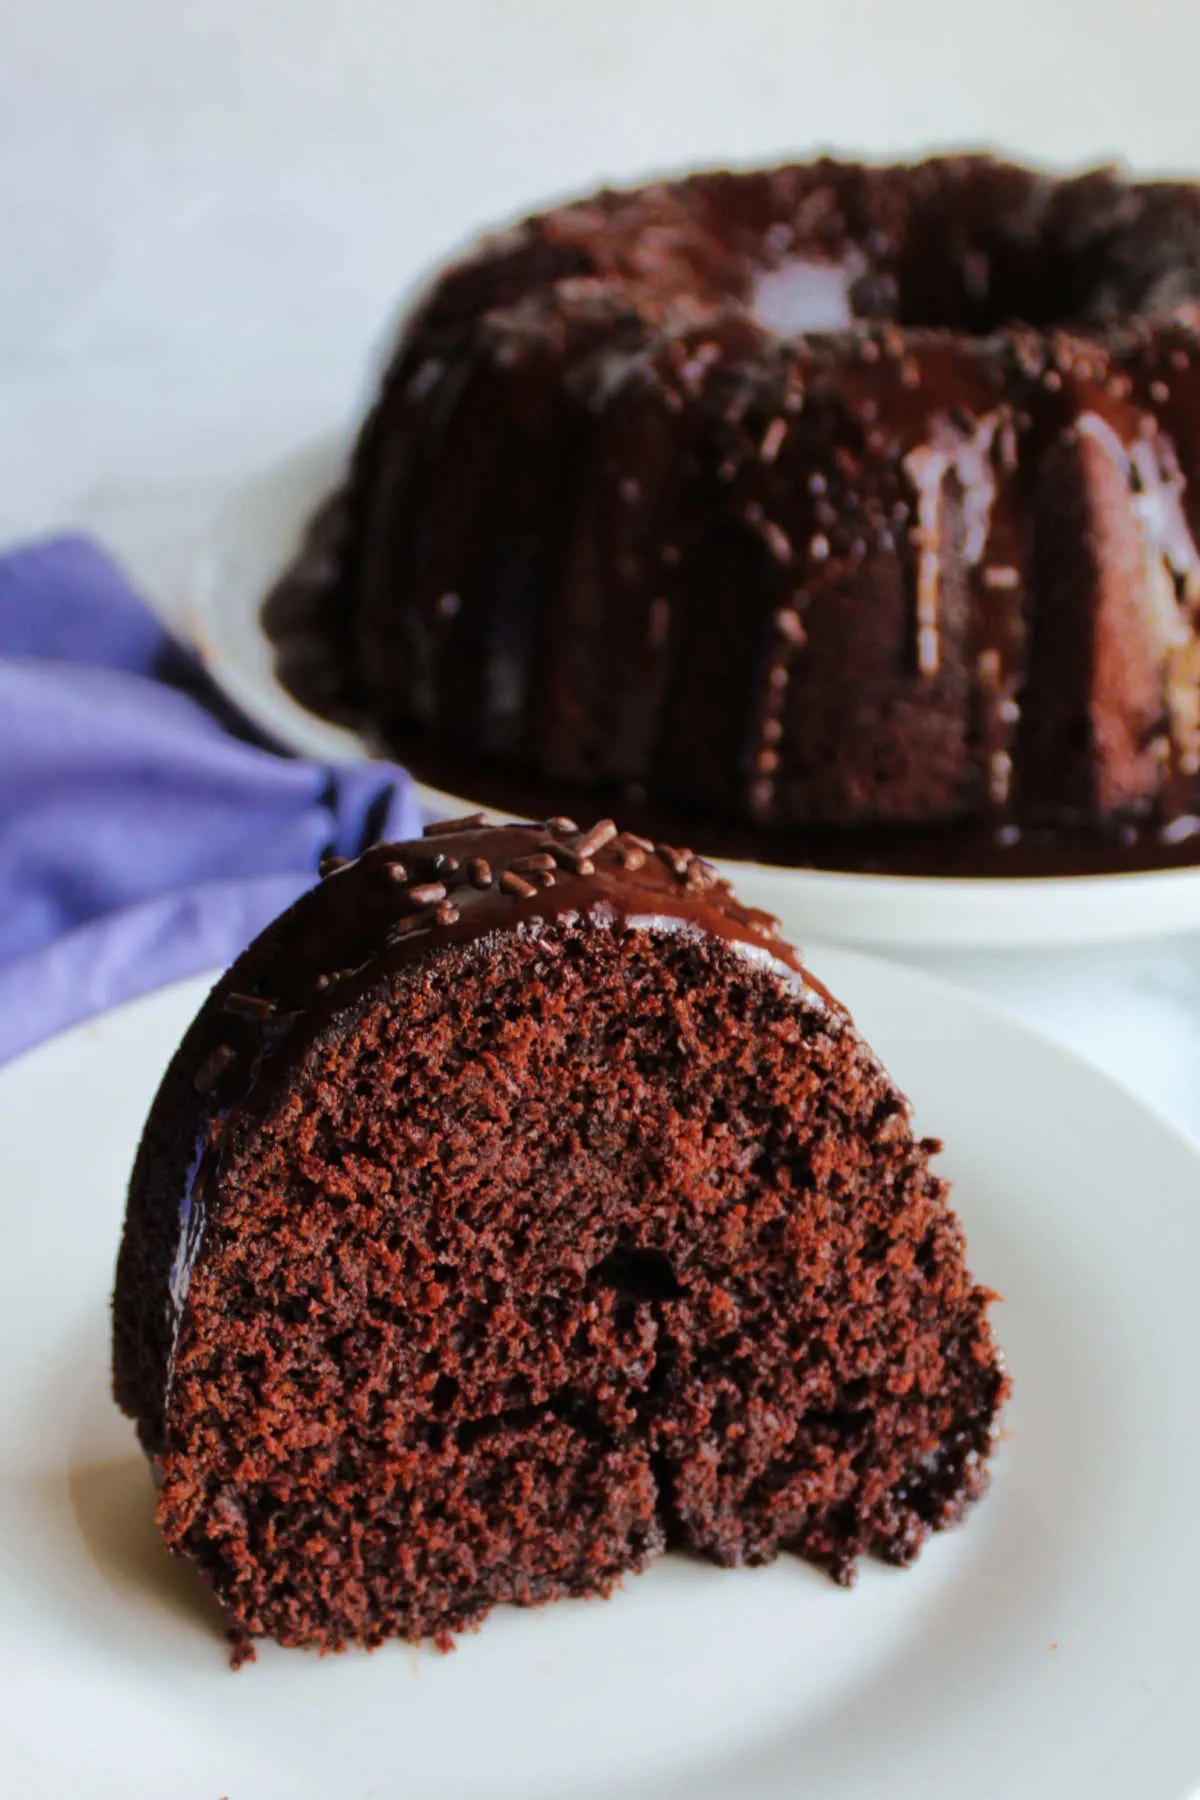 Piece of moist chocolate bundt cake on plate in front of remaining cake.